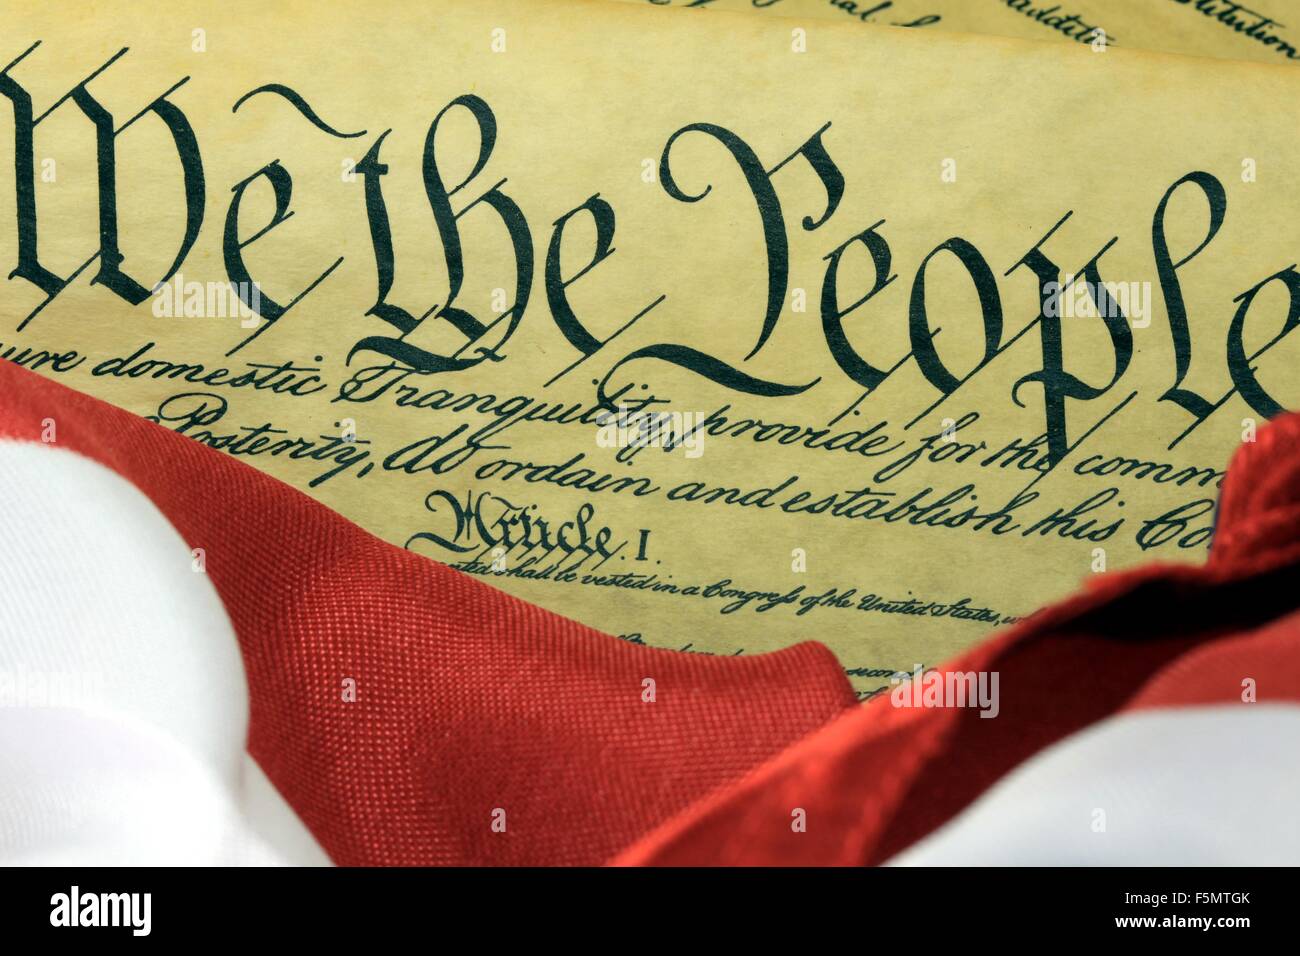 United States Bill of Rights Preamble to the Constitution and American Flag Stock Photo